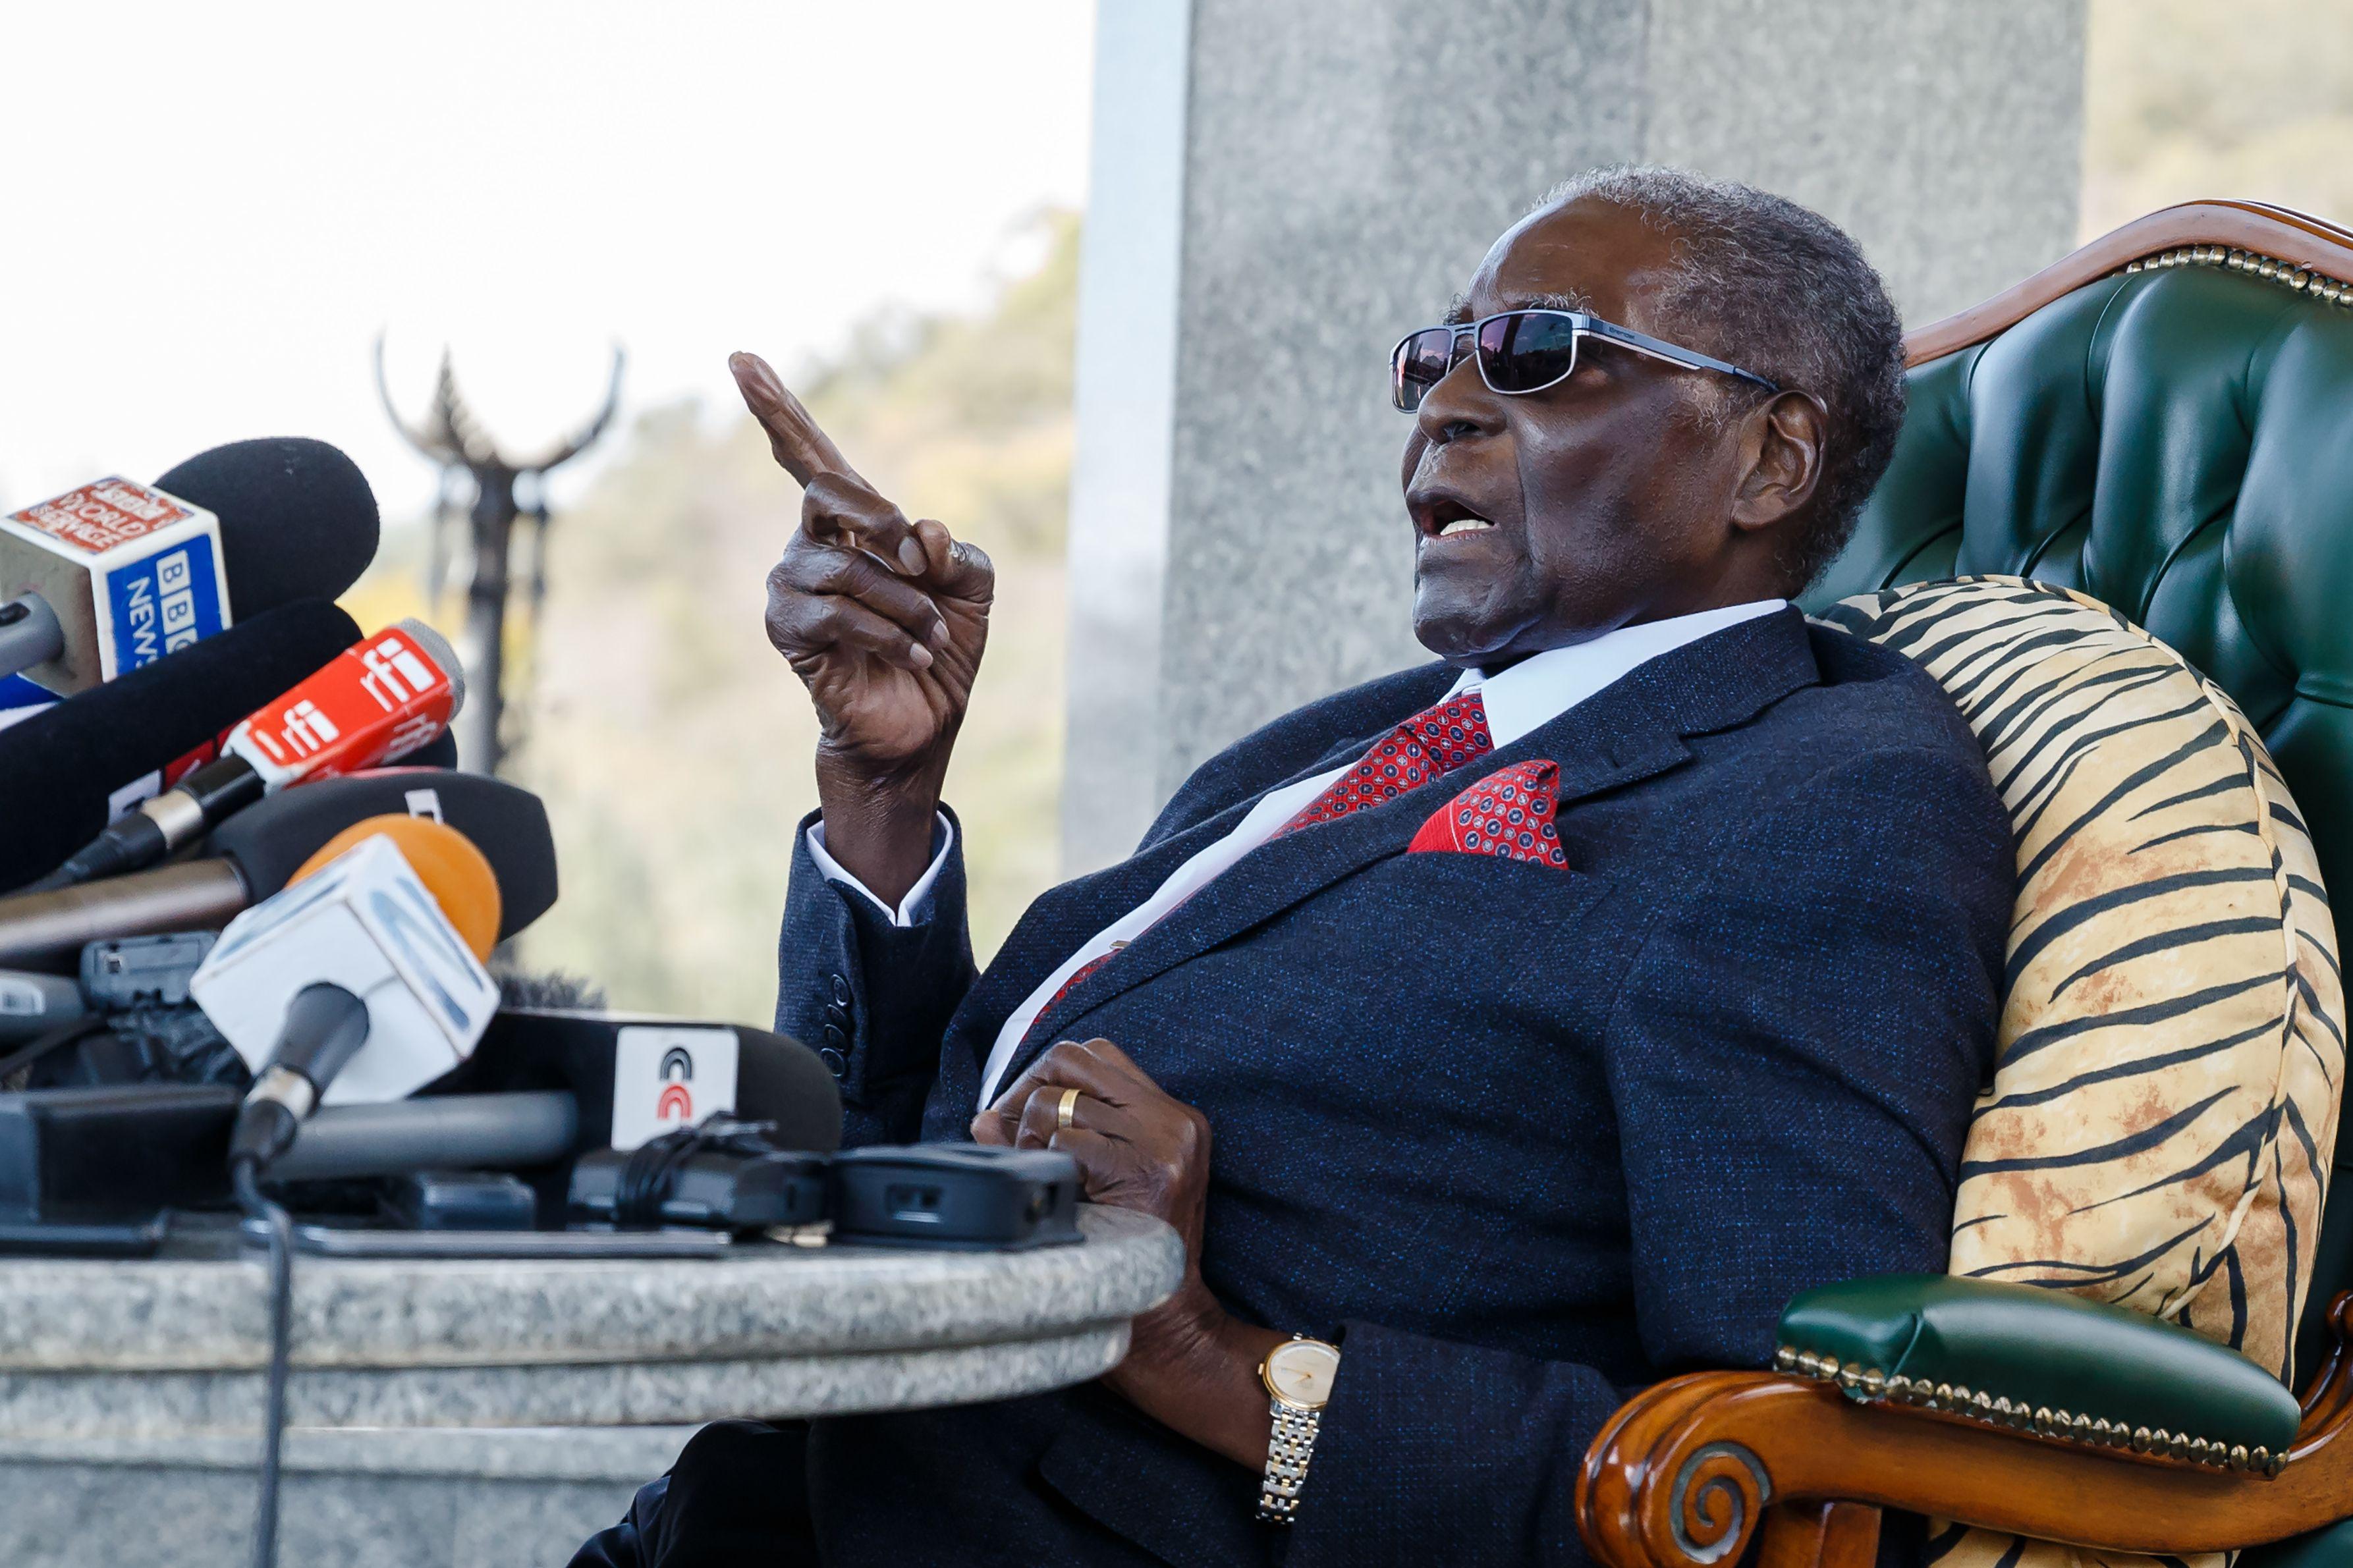 Mugabe slouched back in a chair wearing sunglasses and speaking into a microphone